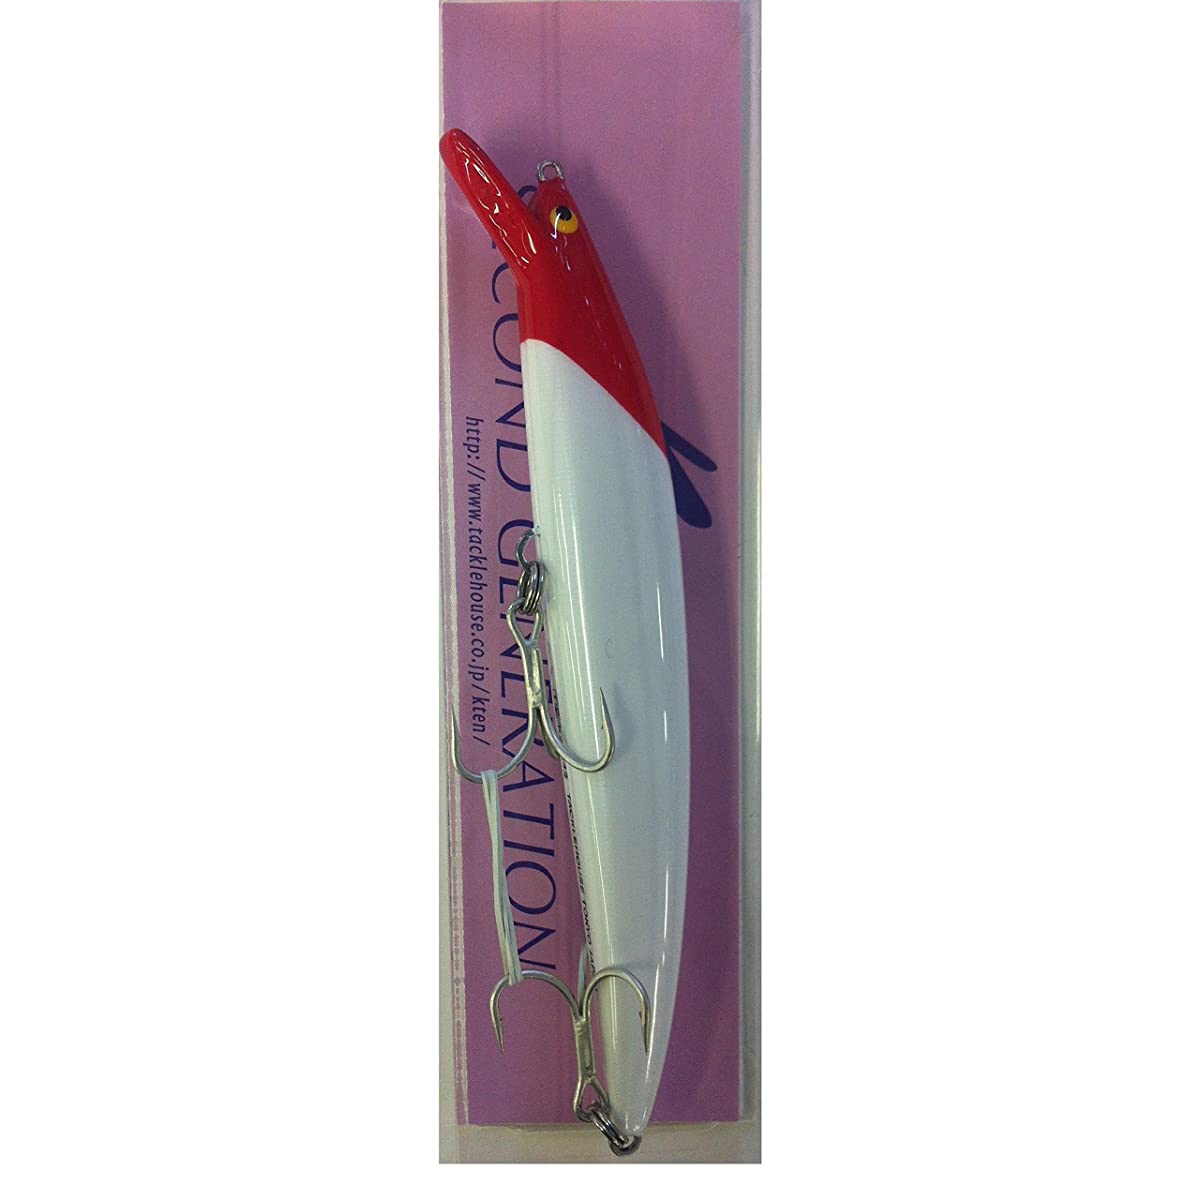  TackleHouse Minnow K-Ten 2nd Generation K2F Factory Model No  Needles 5.6 inches (142 mm) 0.9 oz (26.5 g) S Sardine #109 K2F142 Lure :  Sports & Outdoors